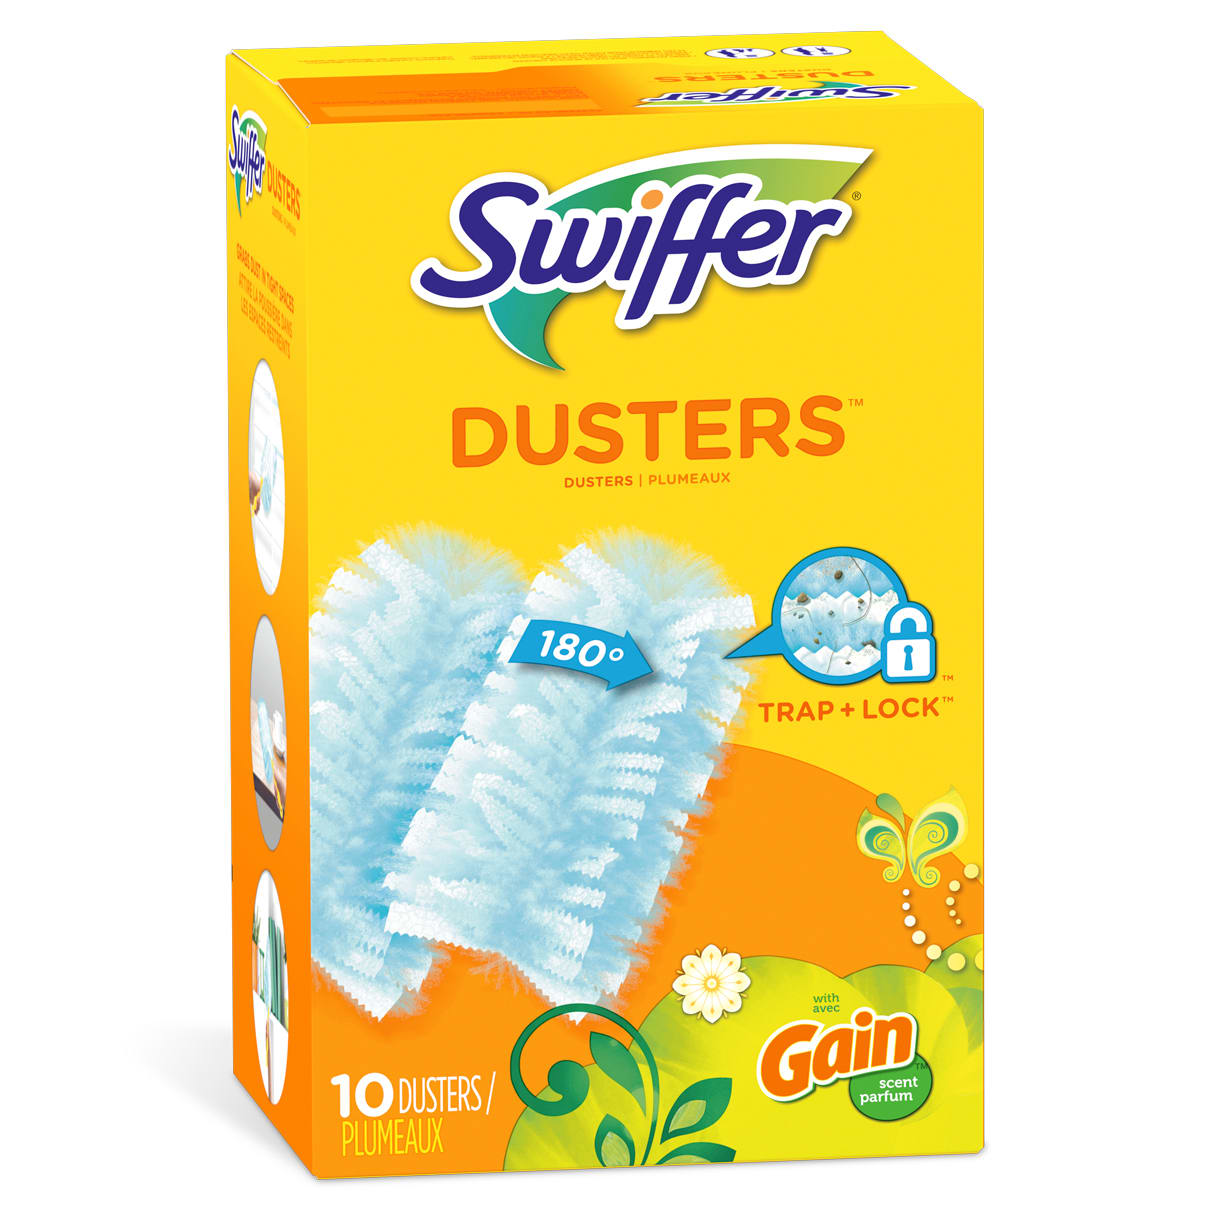 Dusters Refills - Unscented